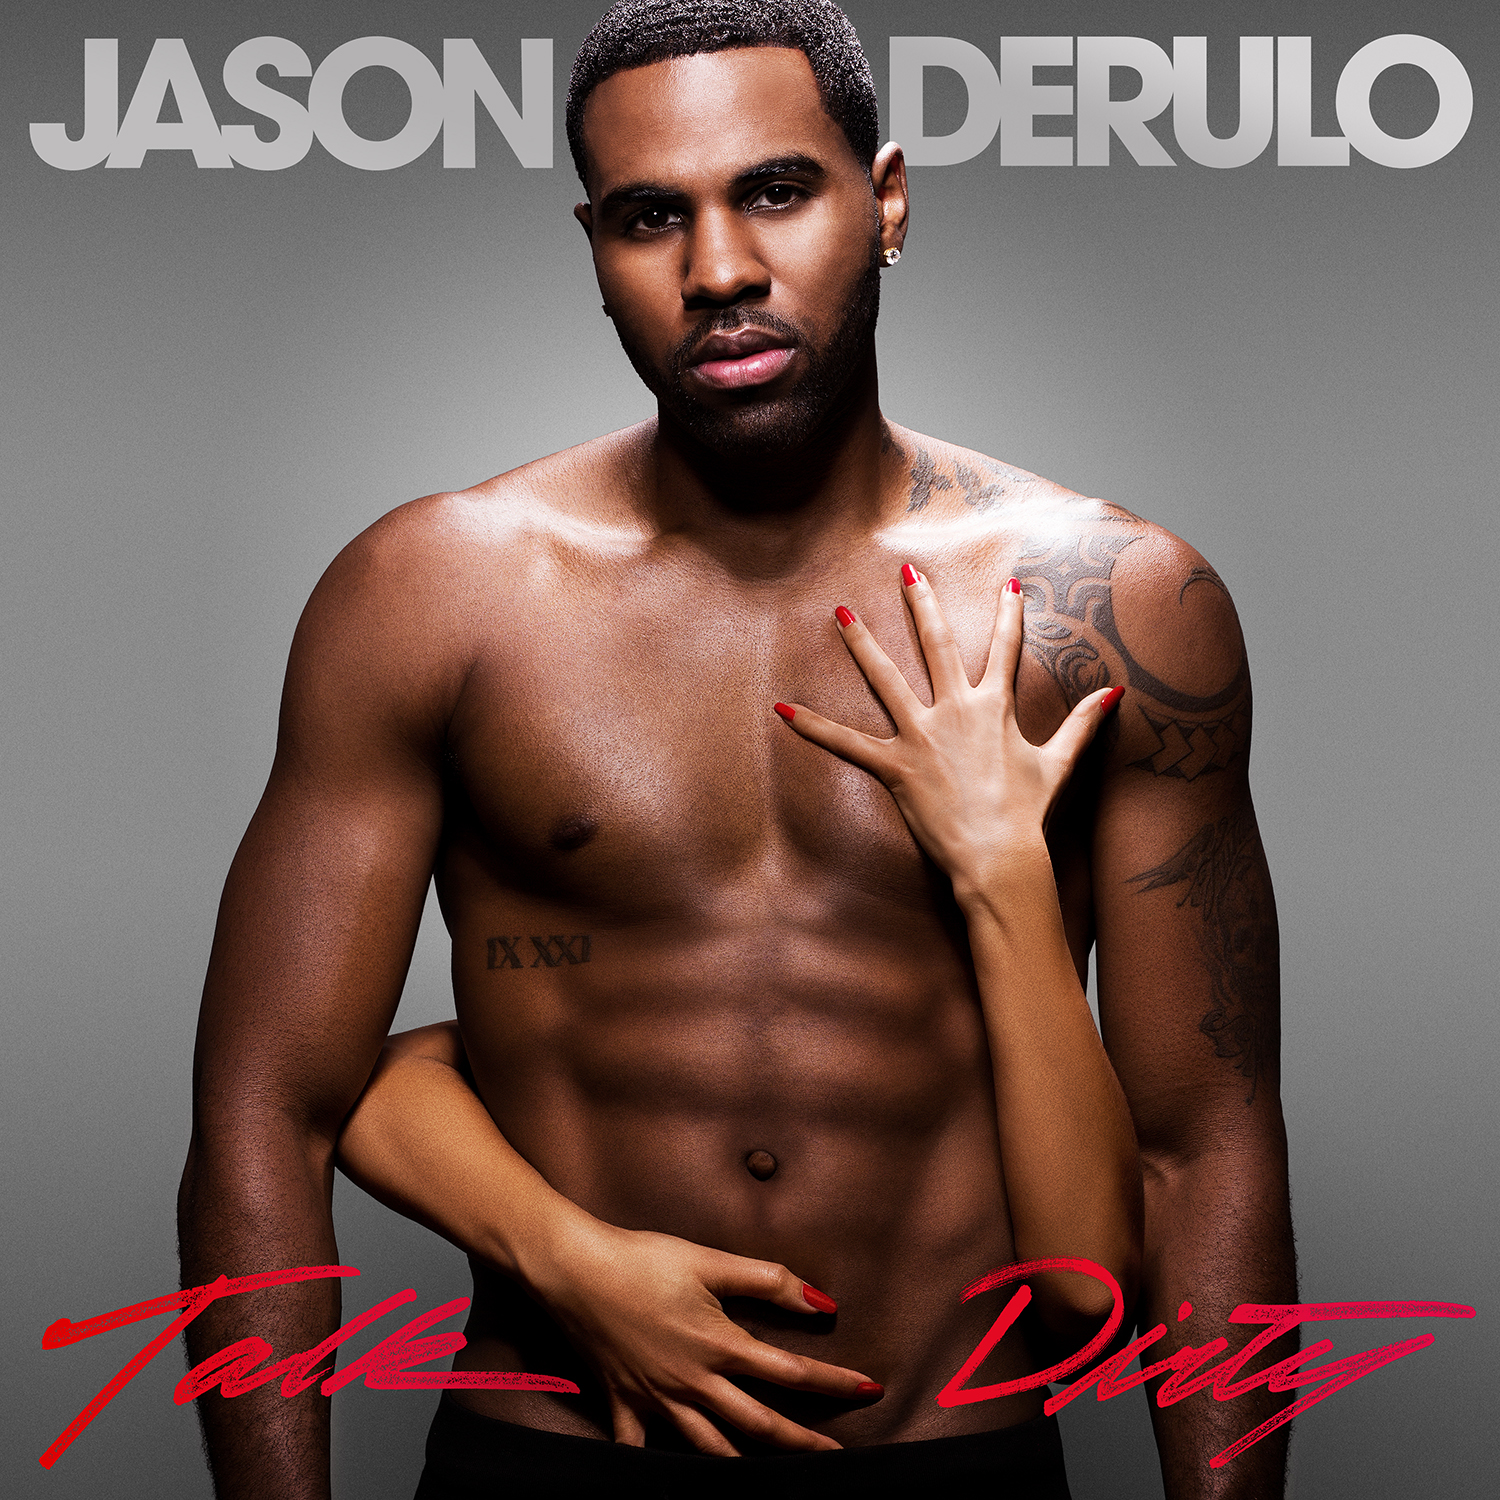 the writer for jason derulo songs